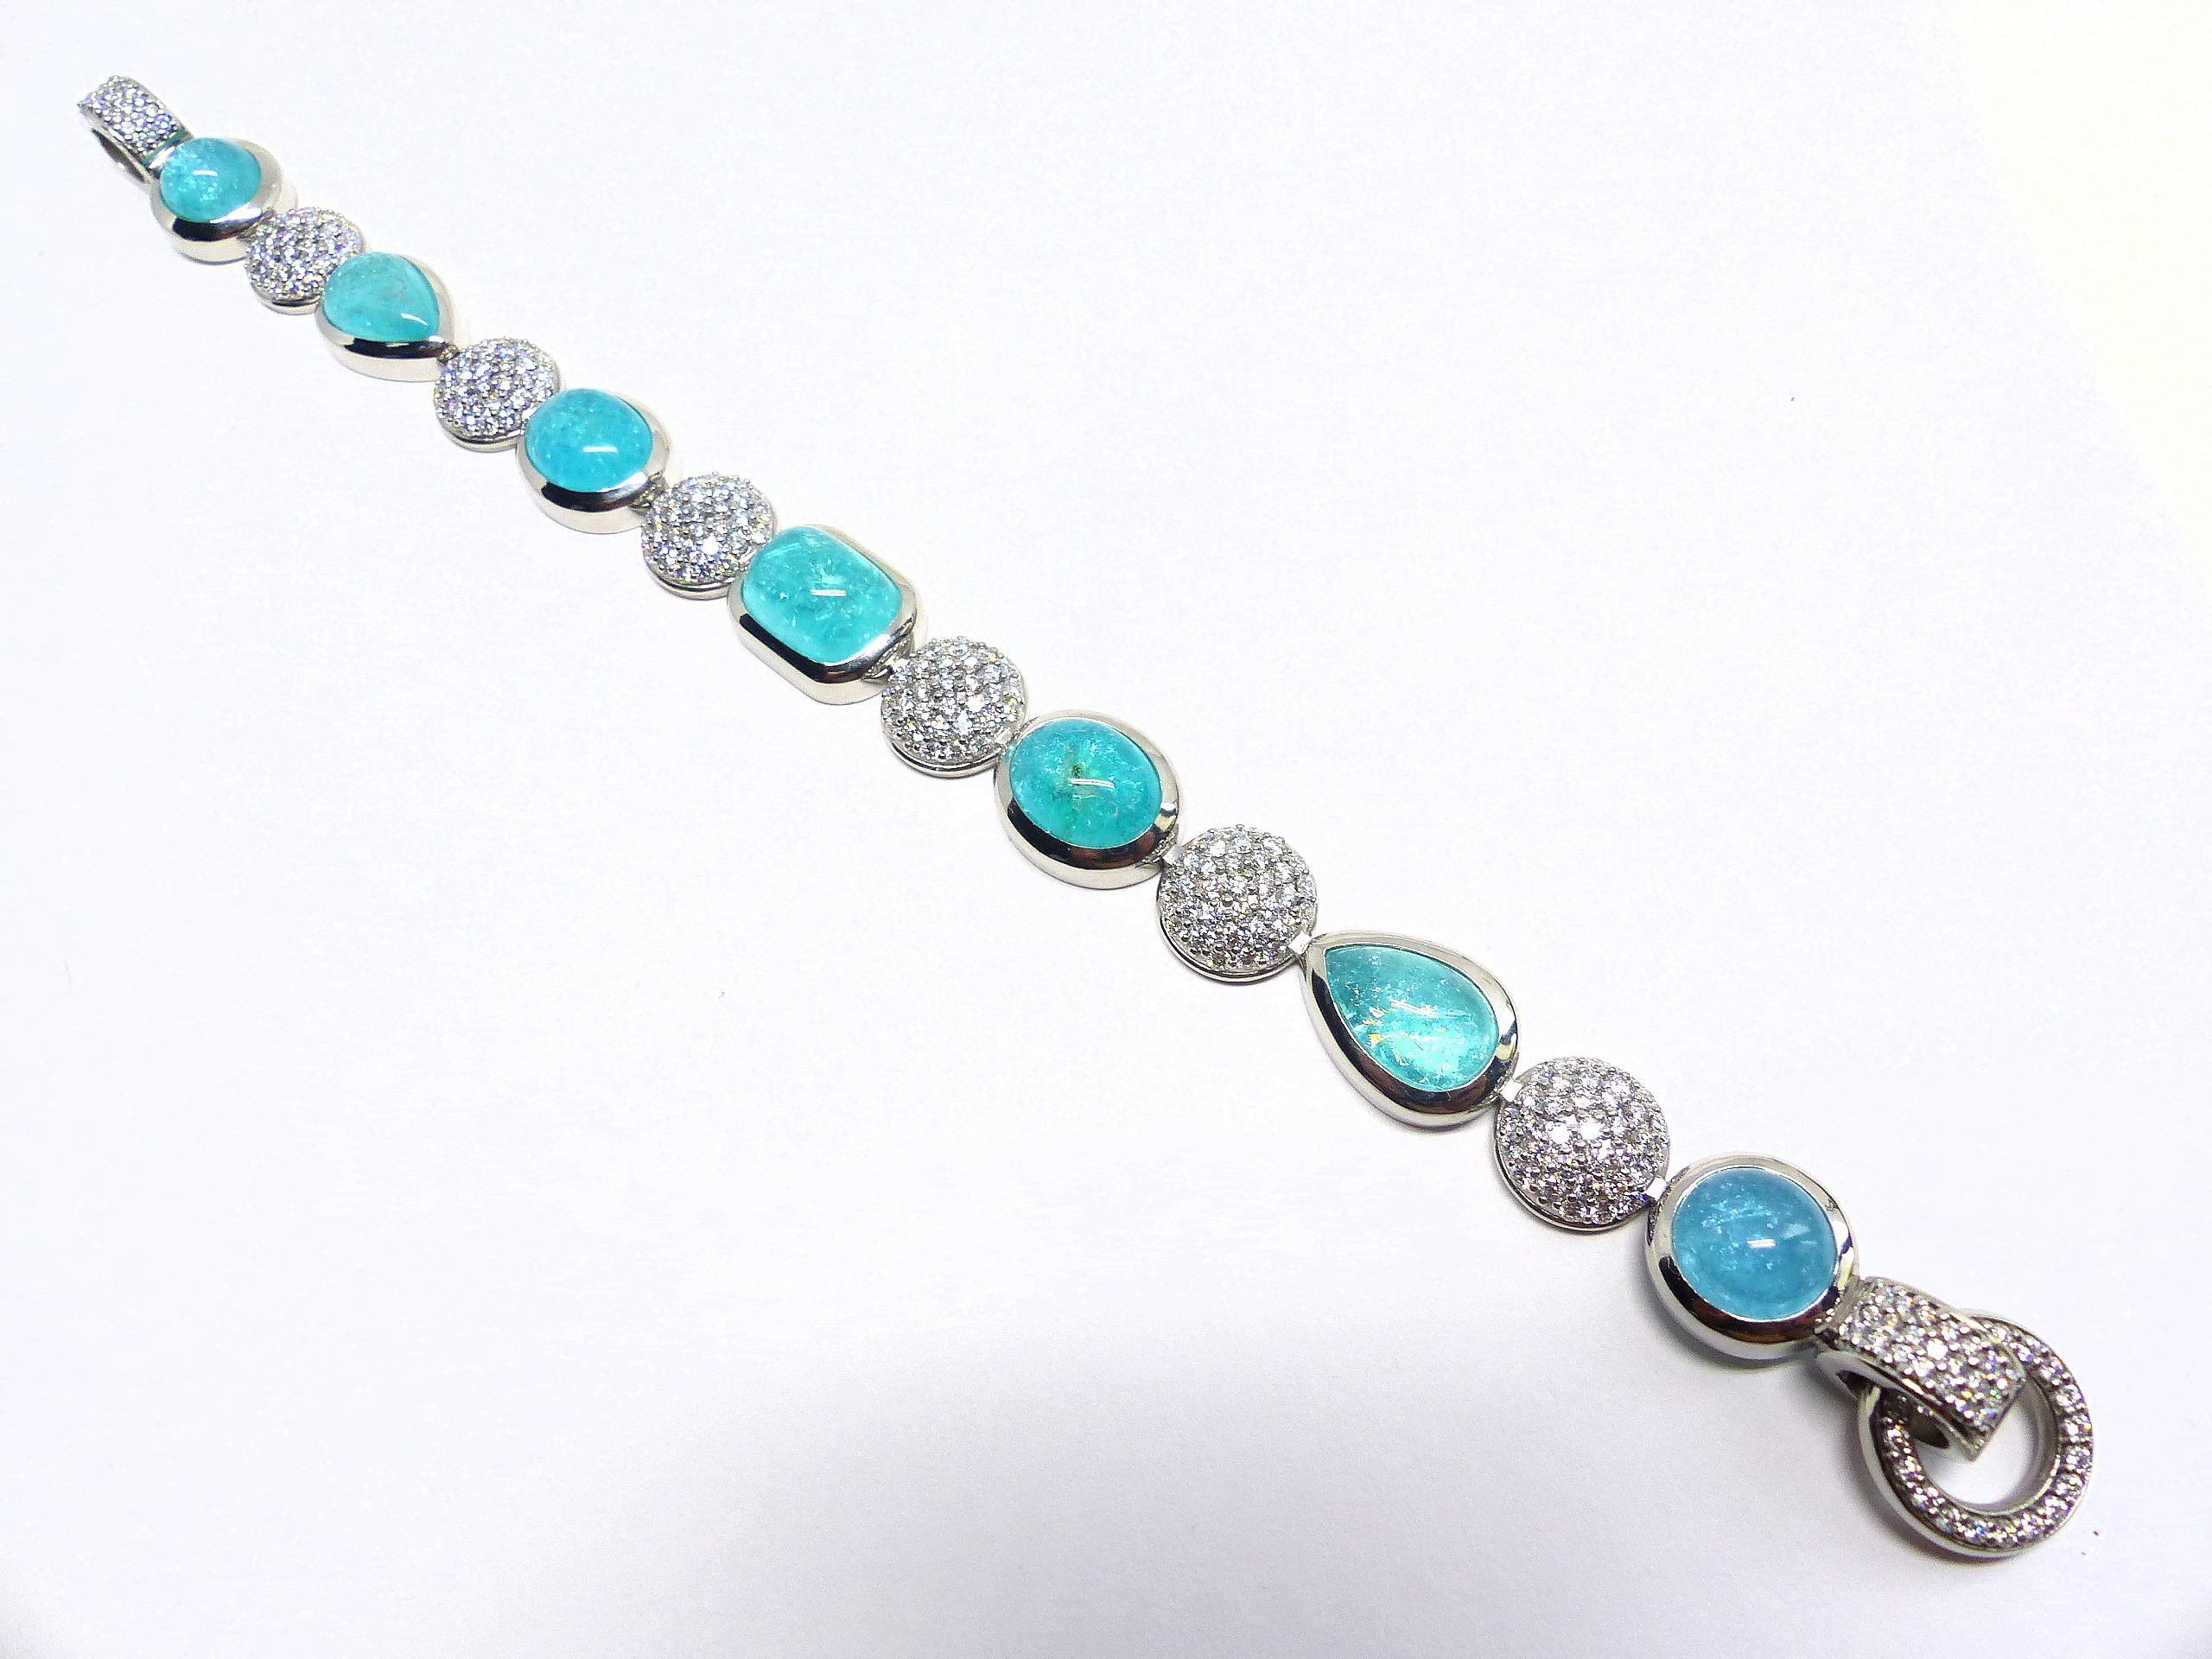 Thomas Leyser is renowned for his contemporary jewellery designs utilizing fine gemstones.

This braclet in 950/Platinum (61.2g) is set with 7x fine matching Paraiba Cabouchons (27.07ct), in magnificient intensiv blue/green (so called